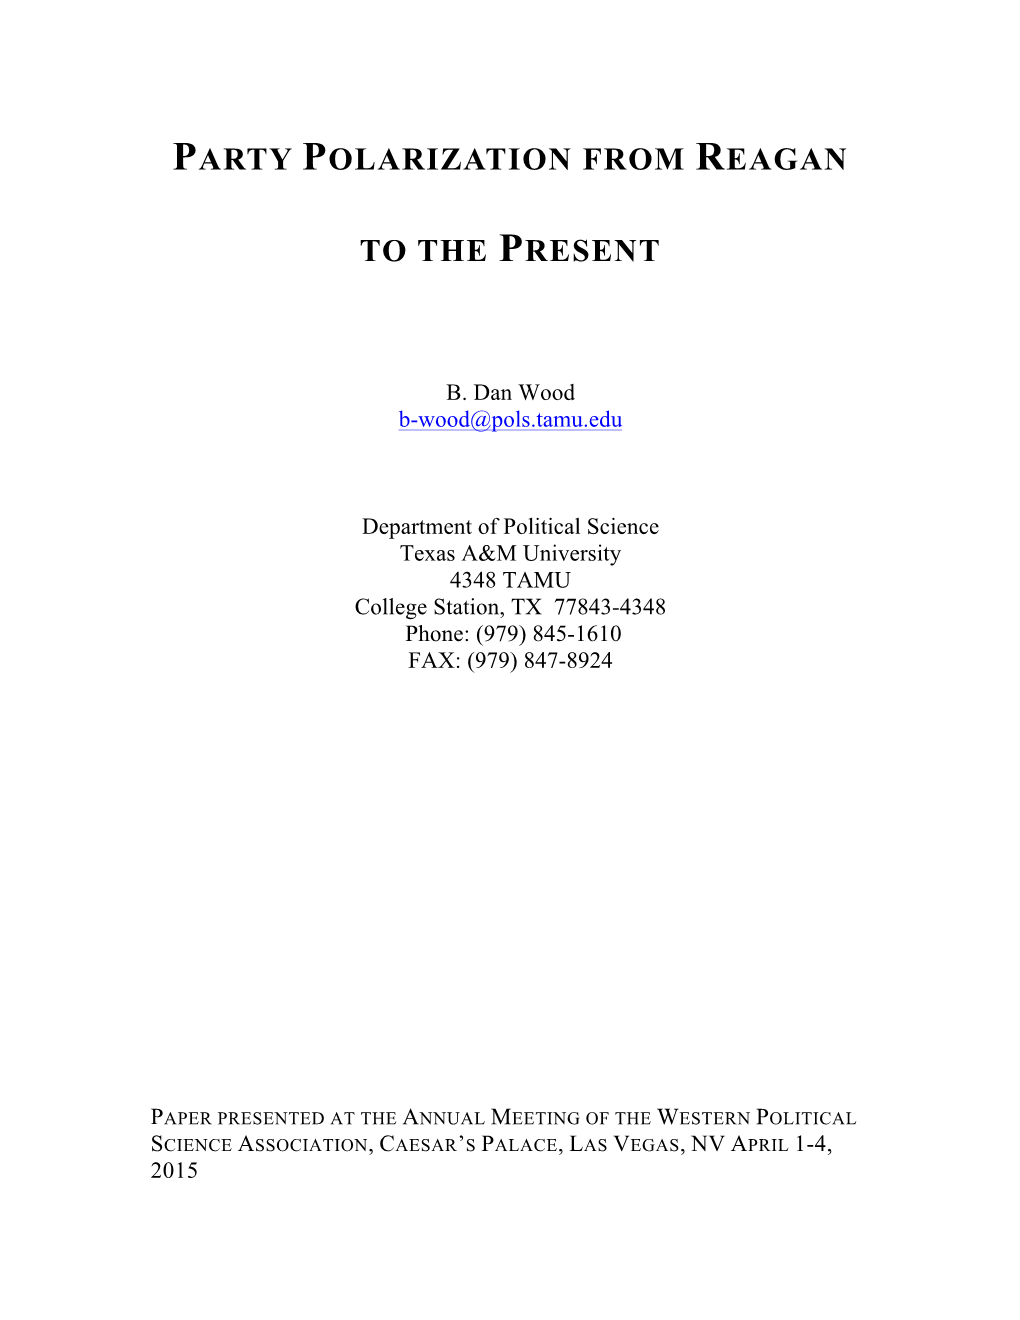 Party Polarization from Reagan to the Present